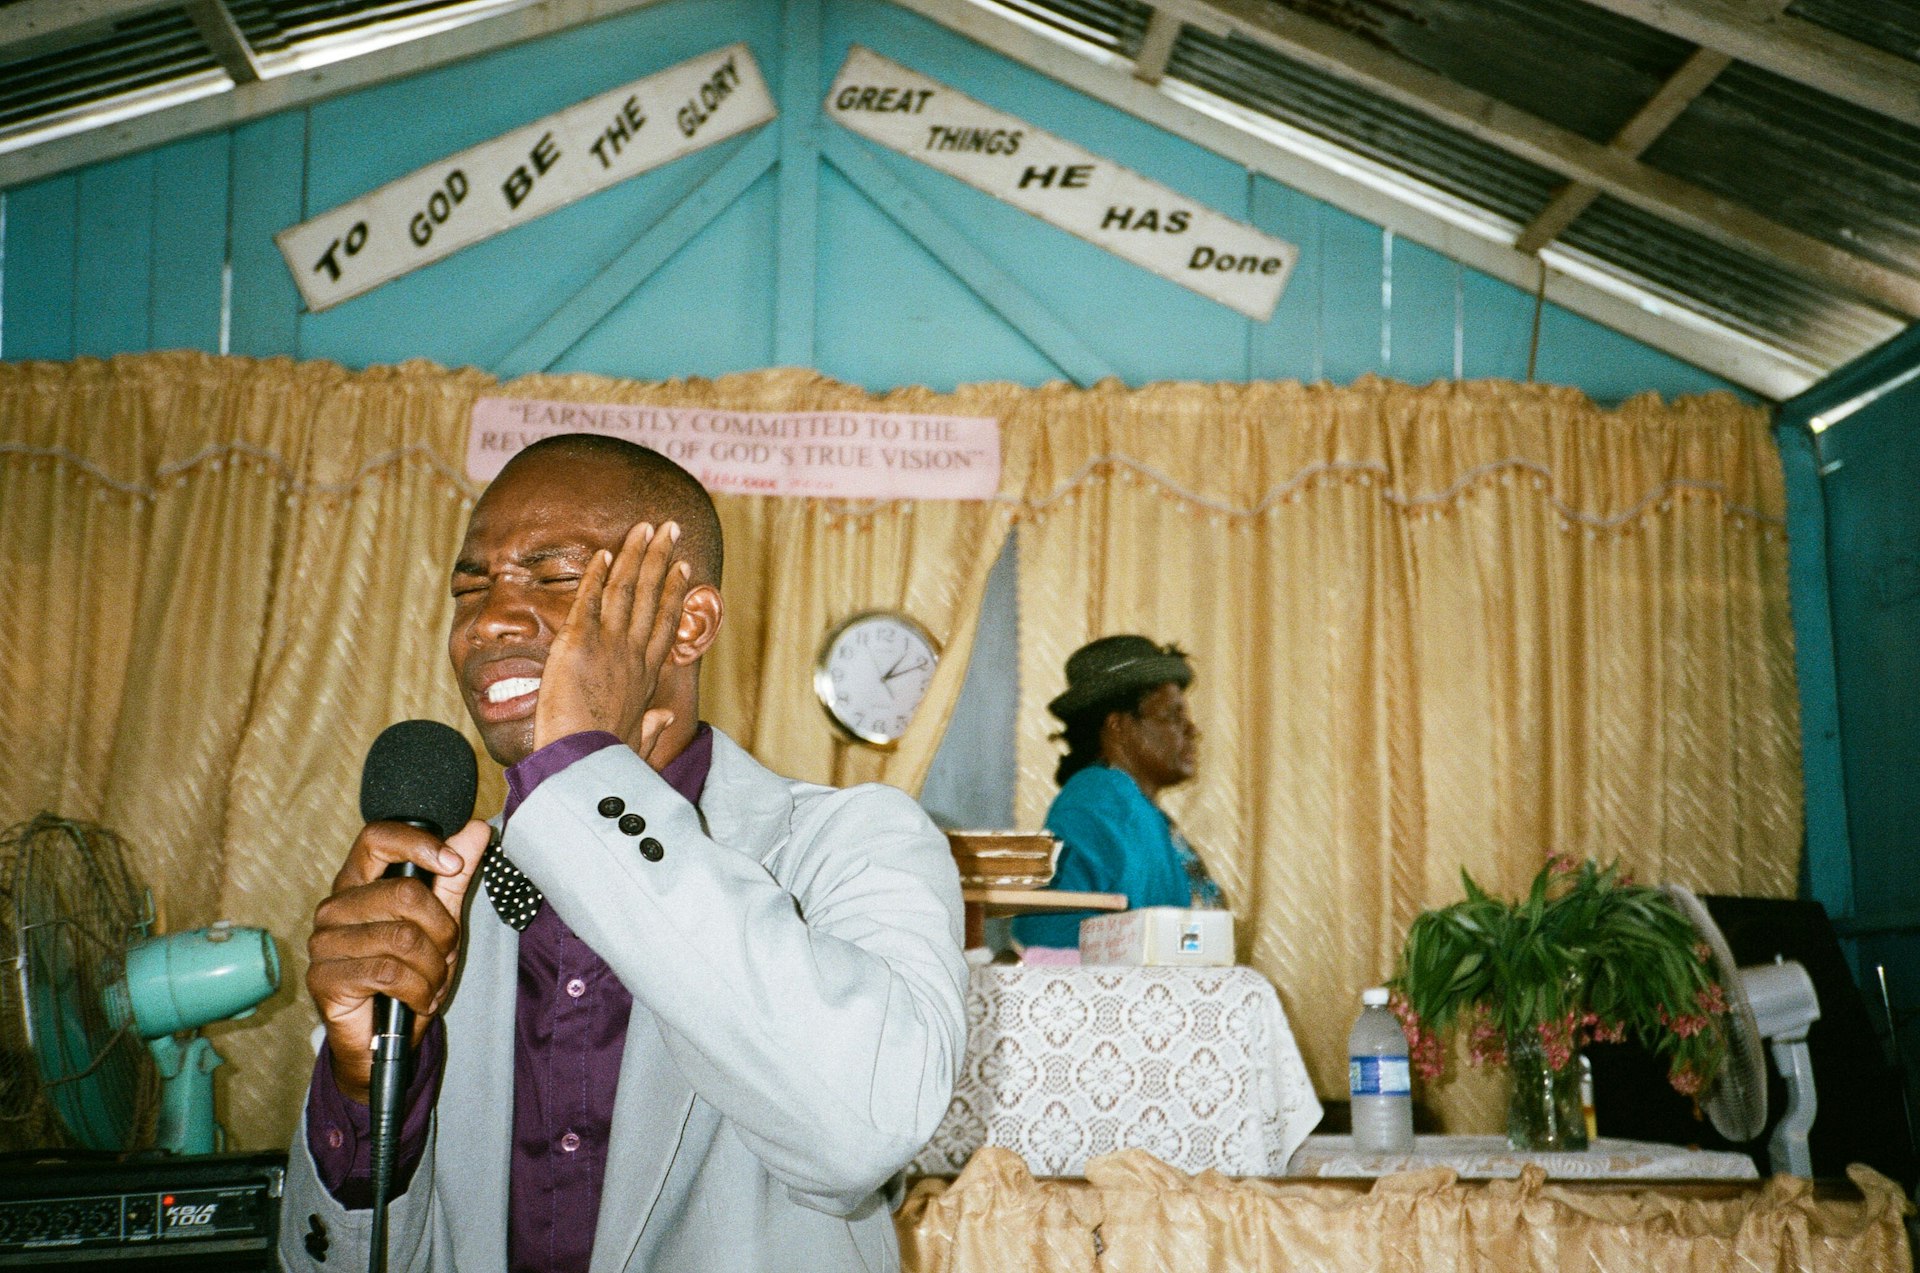 How the worlds of dancehall culture and church collide in Jamaica